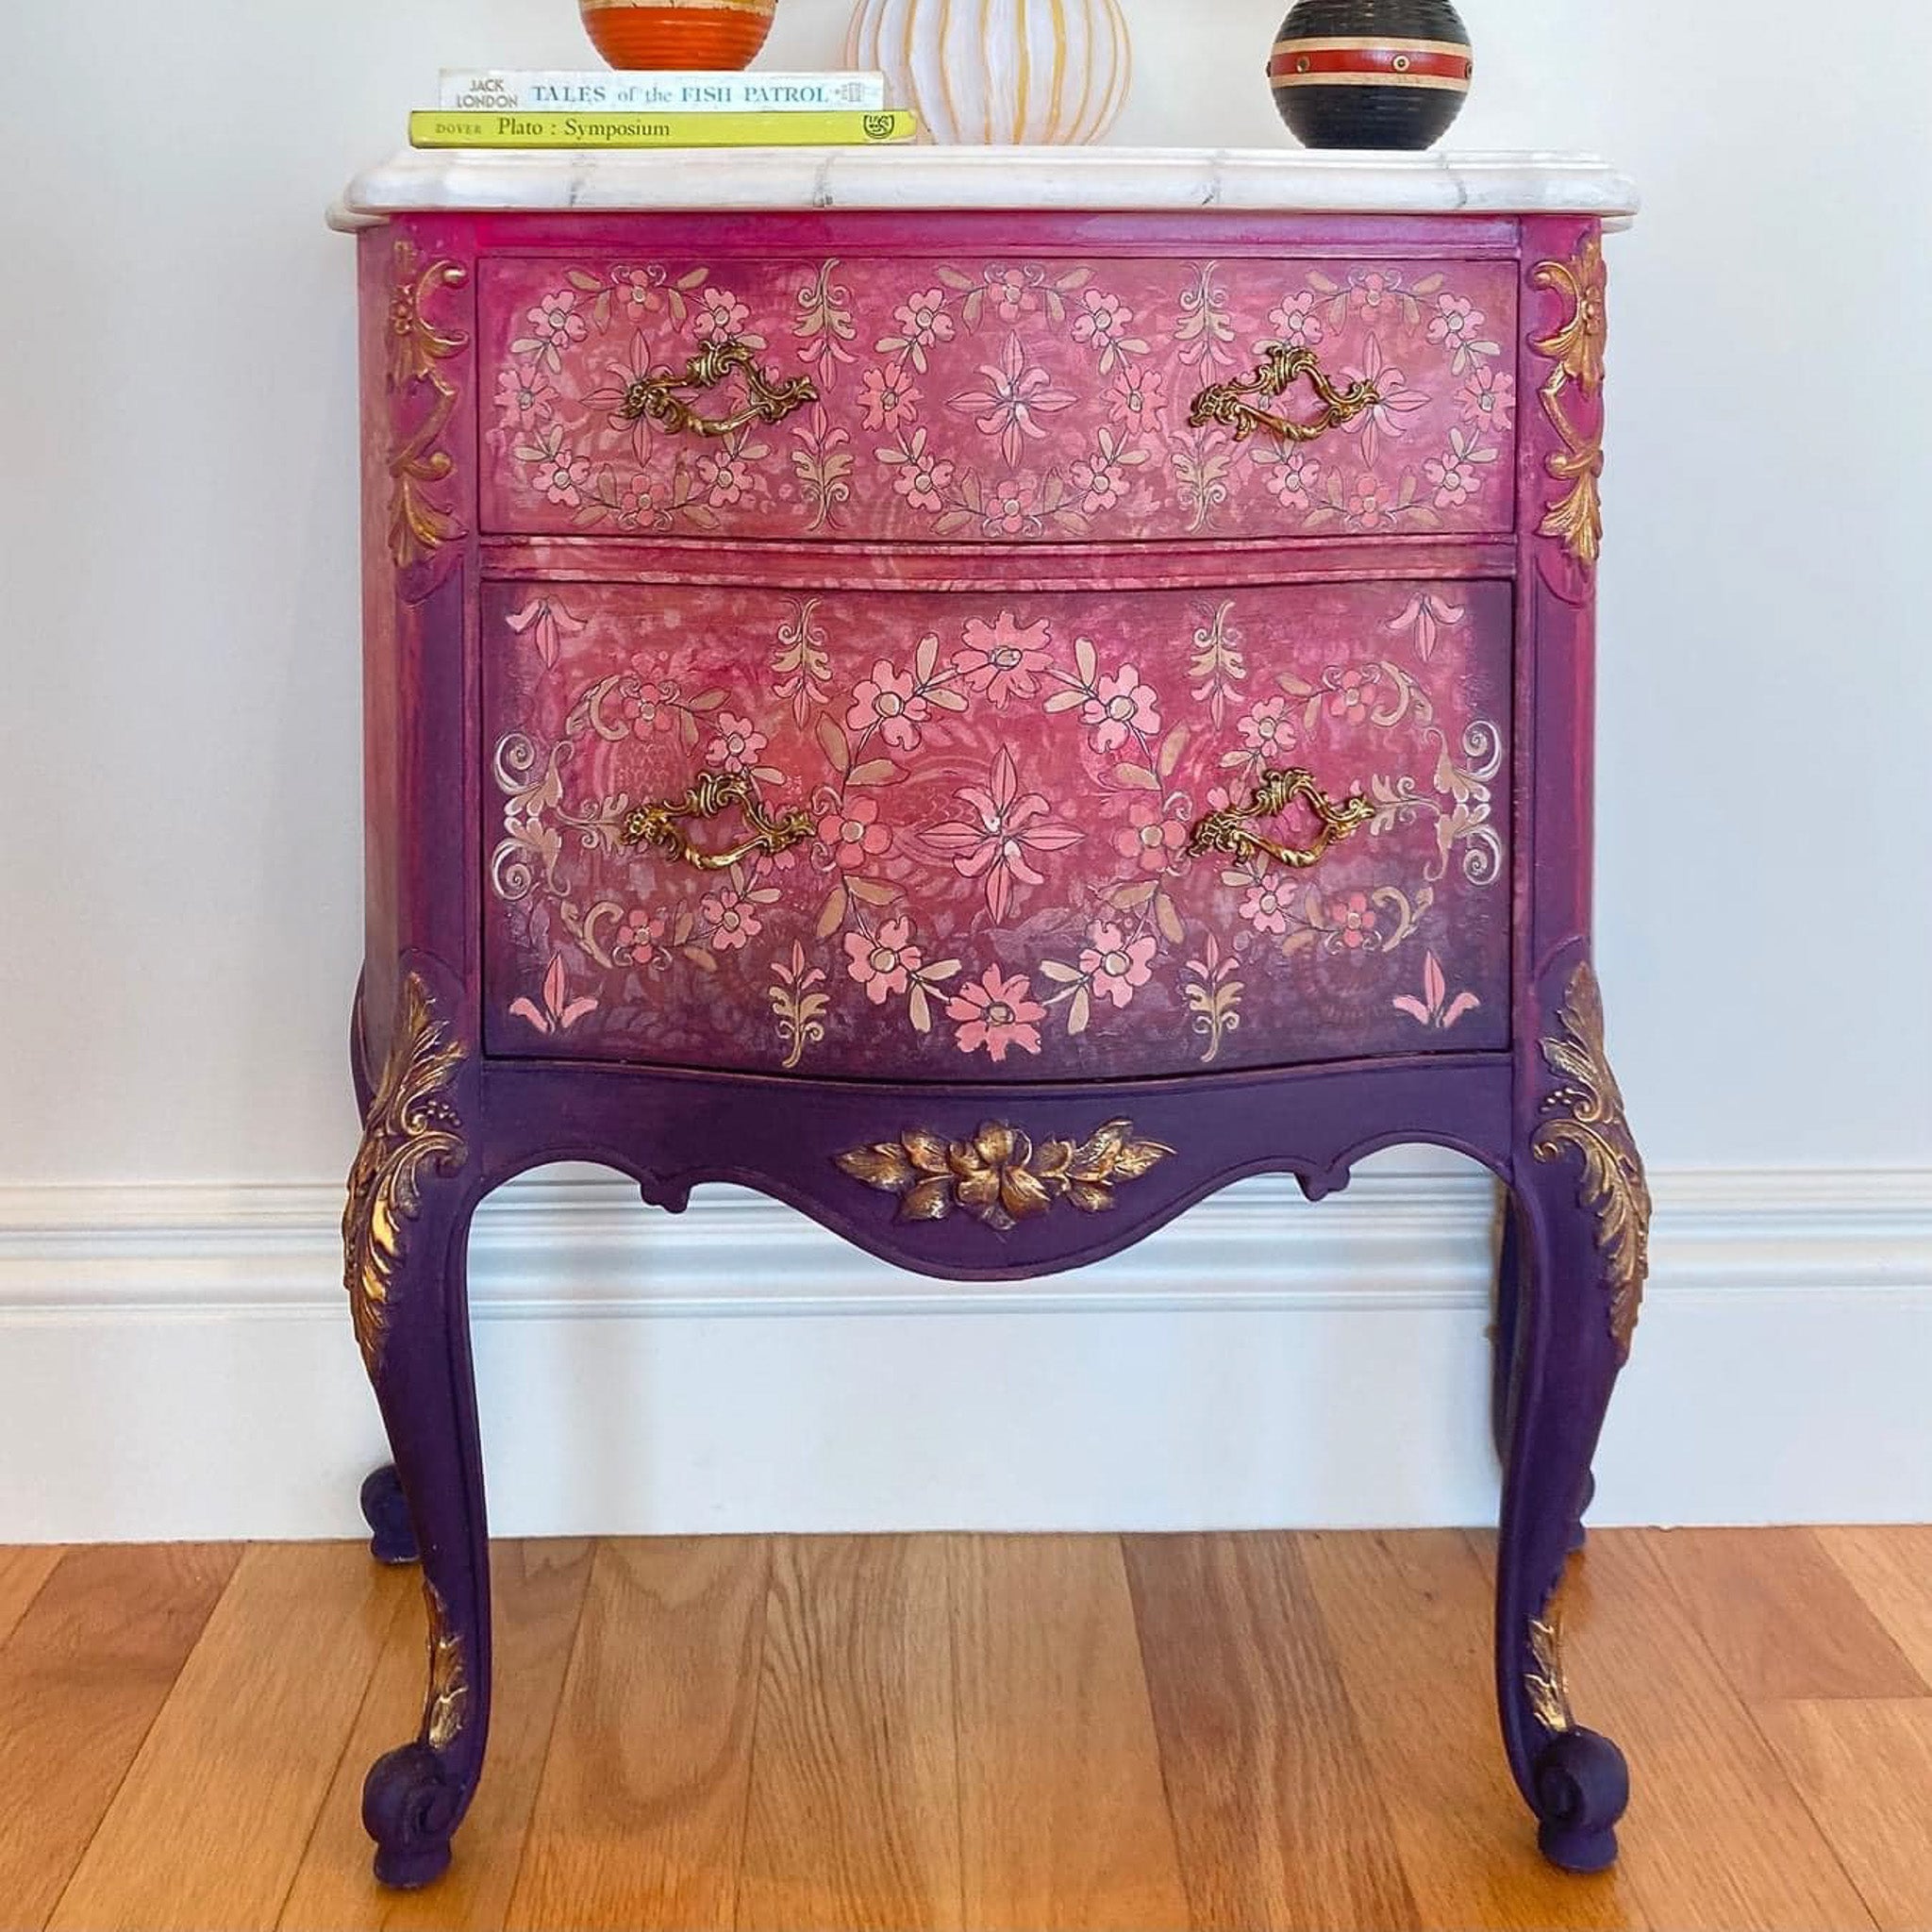 A vintage 2-drawer nightstand is painted an ombre of pink down to purple and features ReDesign with Prima's Annie Sloan Flower Garland rub-on transfer on its drawers.